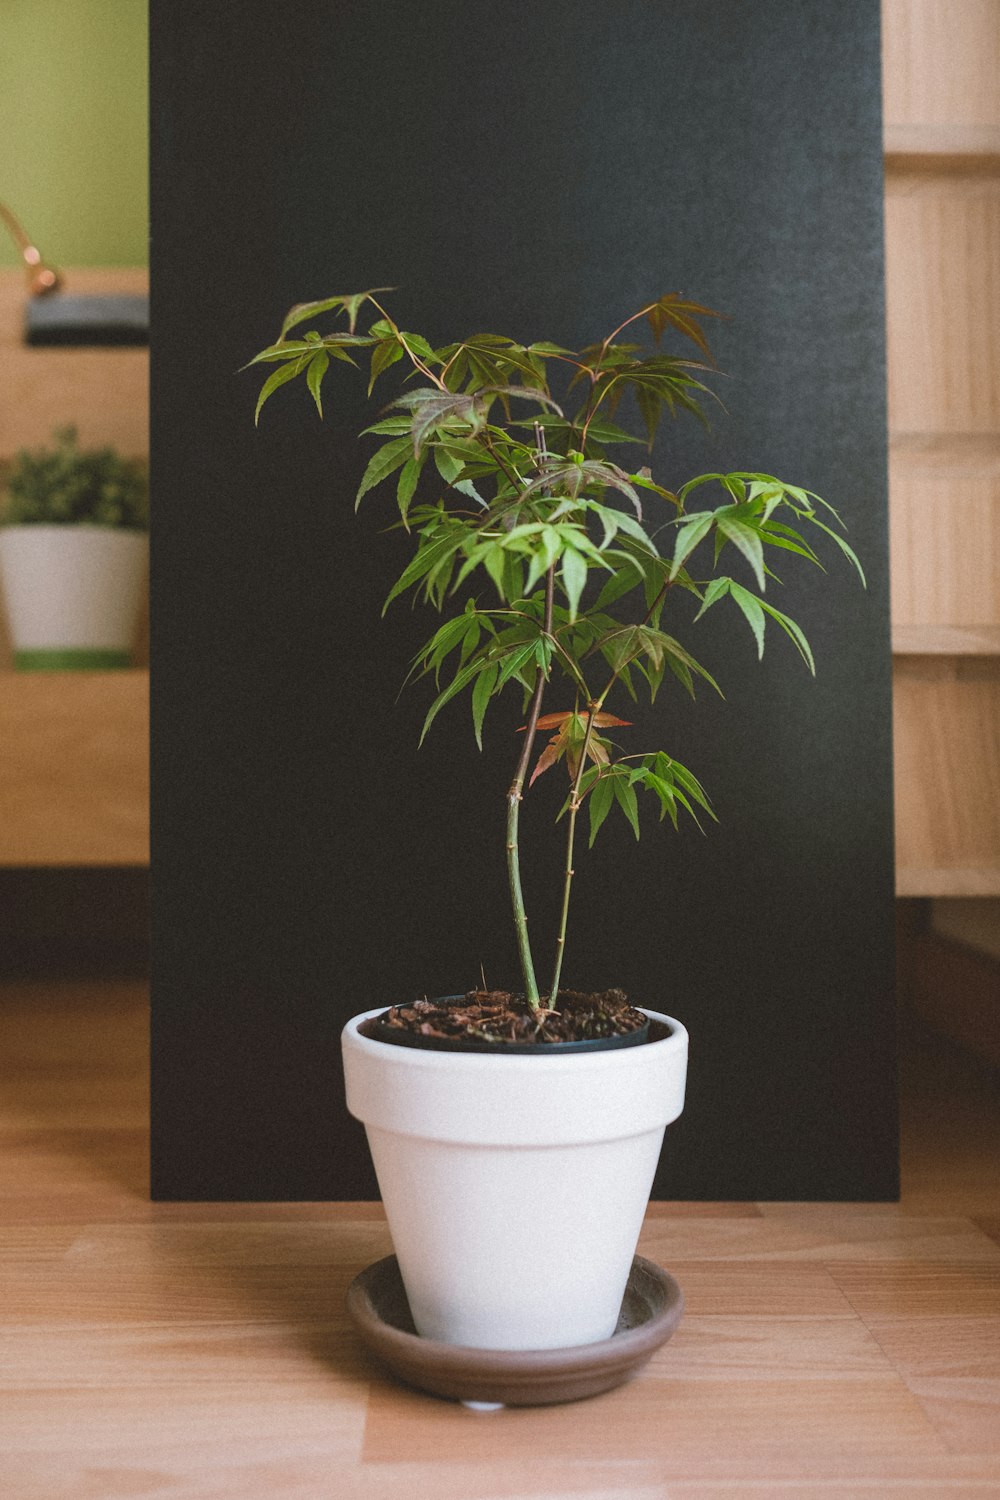 photo of cannabis plant with pot